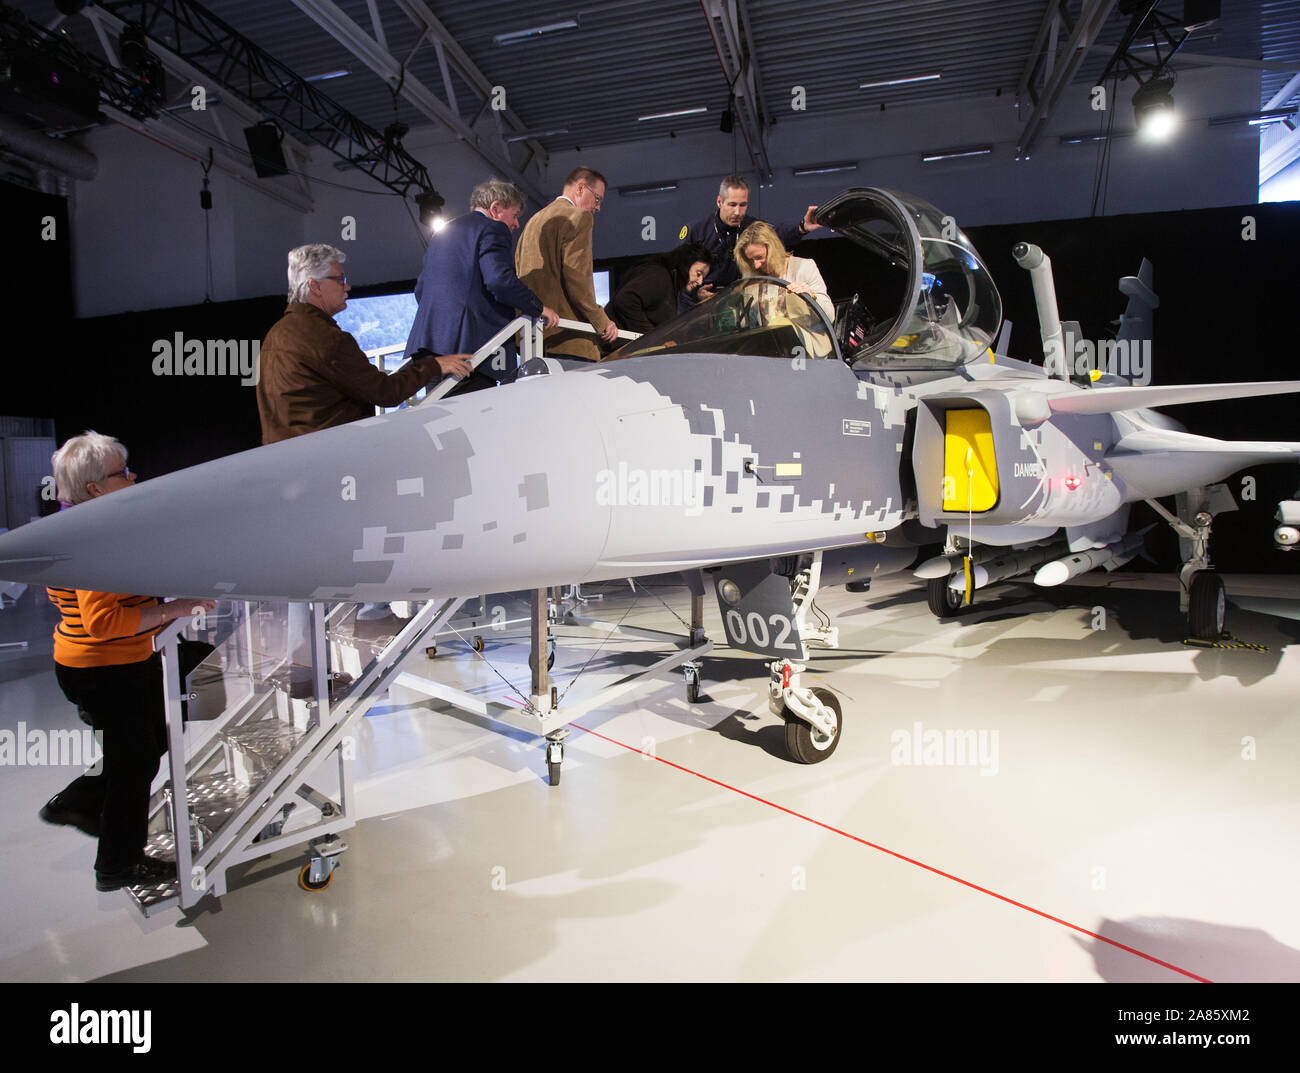 Visitors To Saab In Linkoping Who Are Allowed To Try A Model Of The New Jas 39 Gripen E The Production Of The Next Swedish Fighter Aircraft The First Gripen E Is